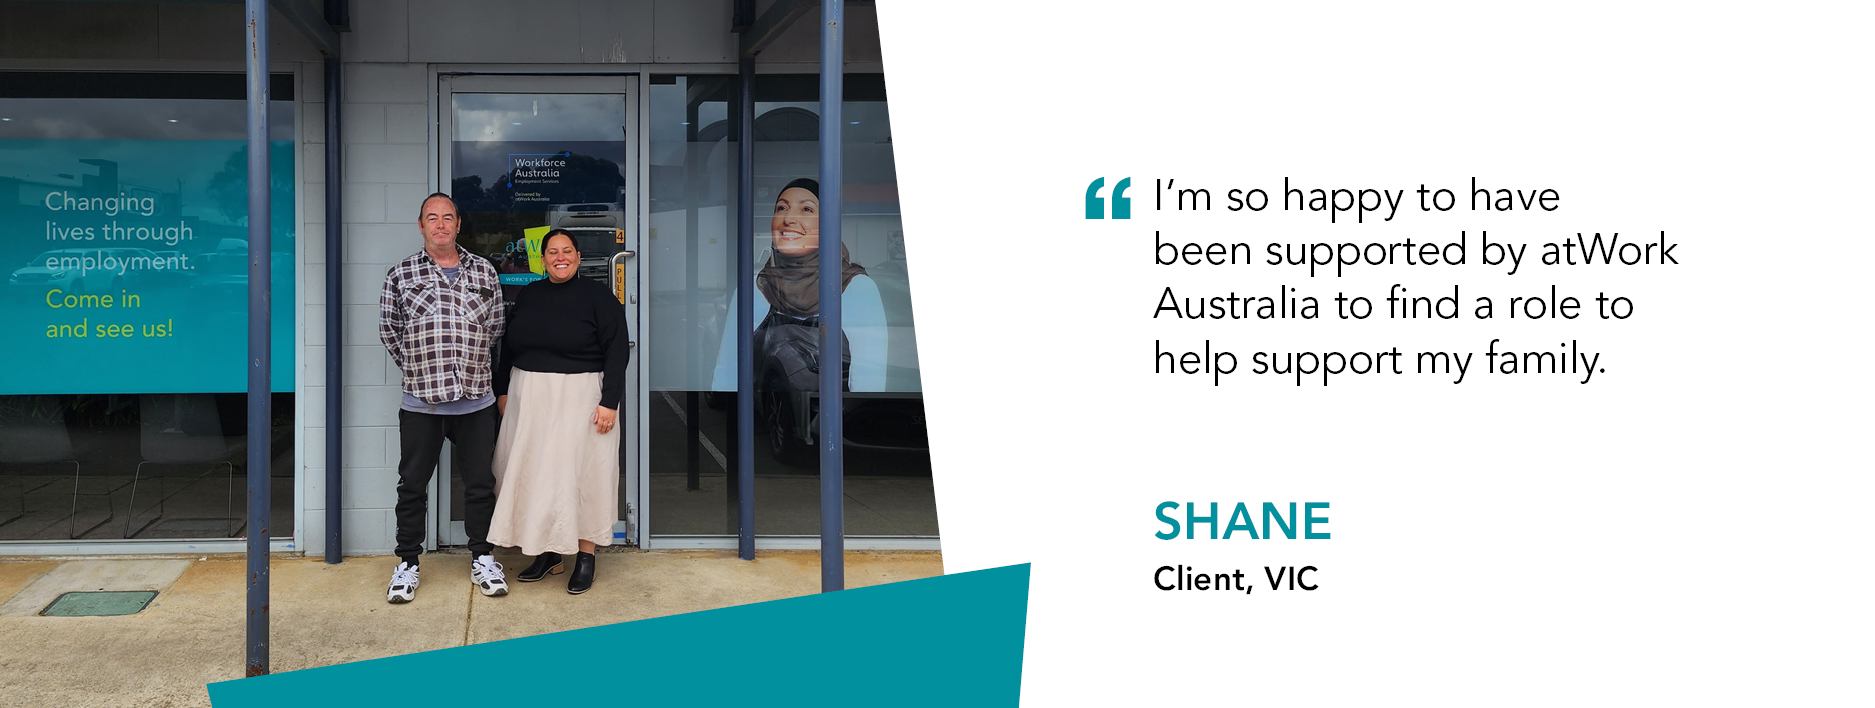 Quote reads "I'm so happy to have been supported by atWork Australia to find a role to help support my family." Shane Client Victoria